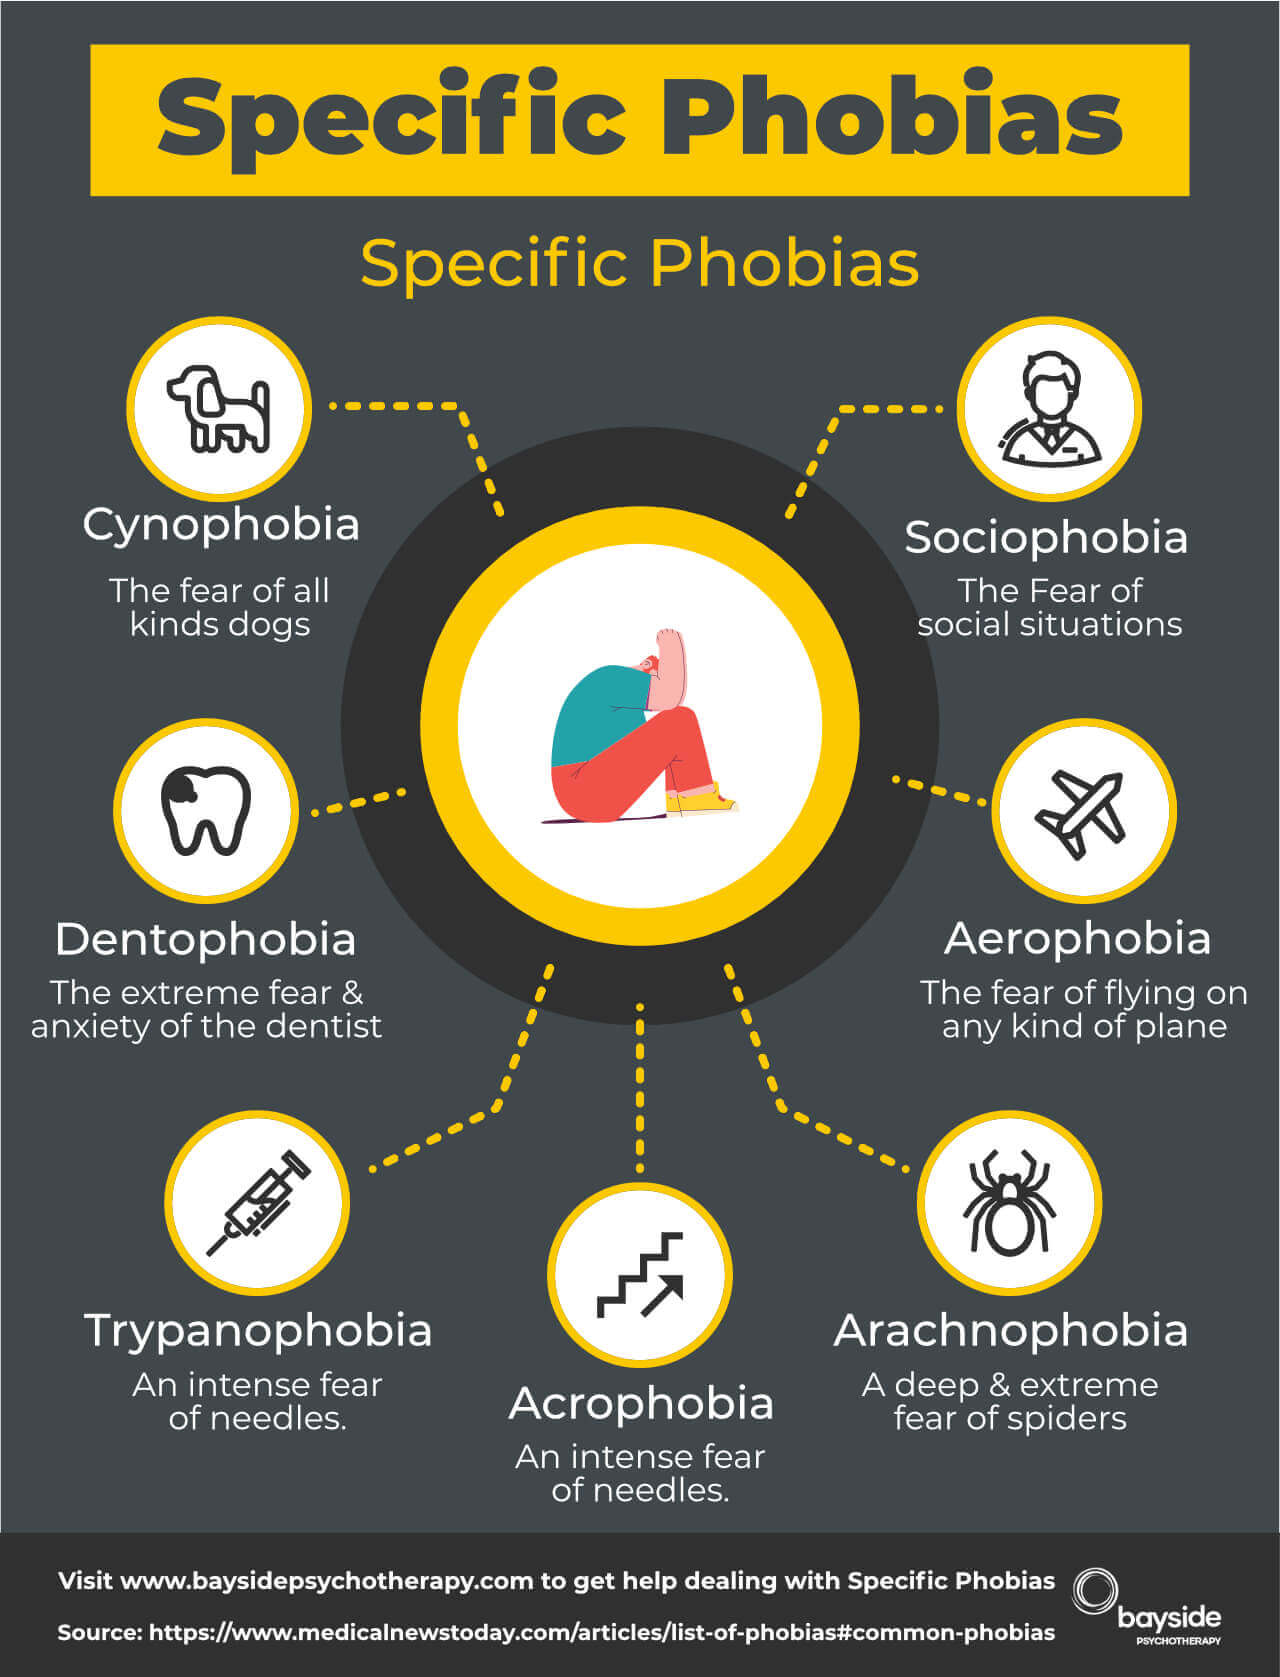 Specific Phobias Infographic Types of Phobias - Bayside Psychotherapy